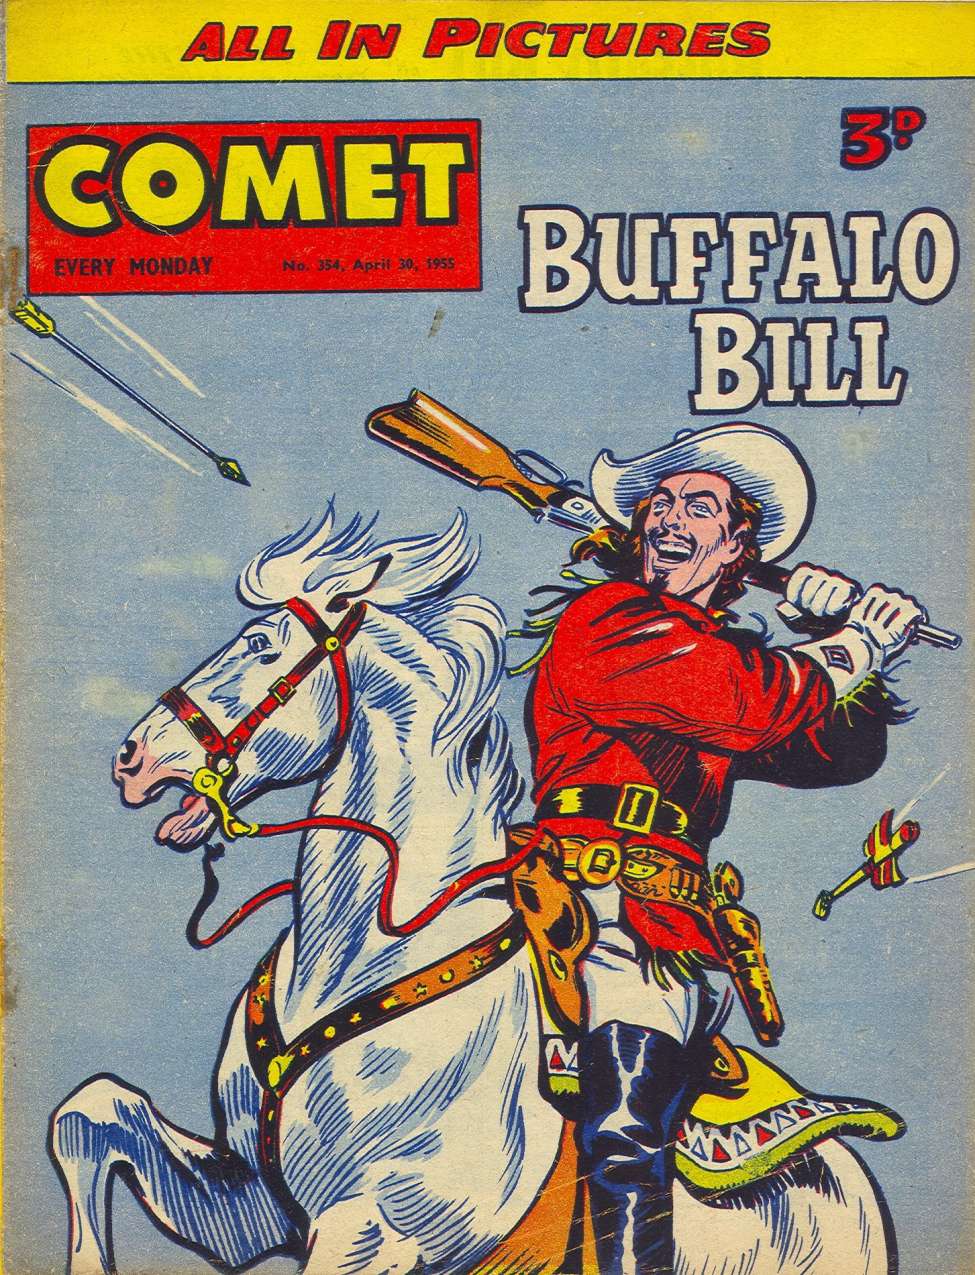 Book Cover For The Comet 354